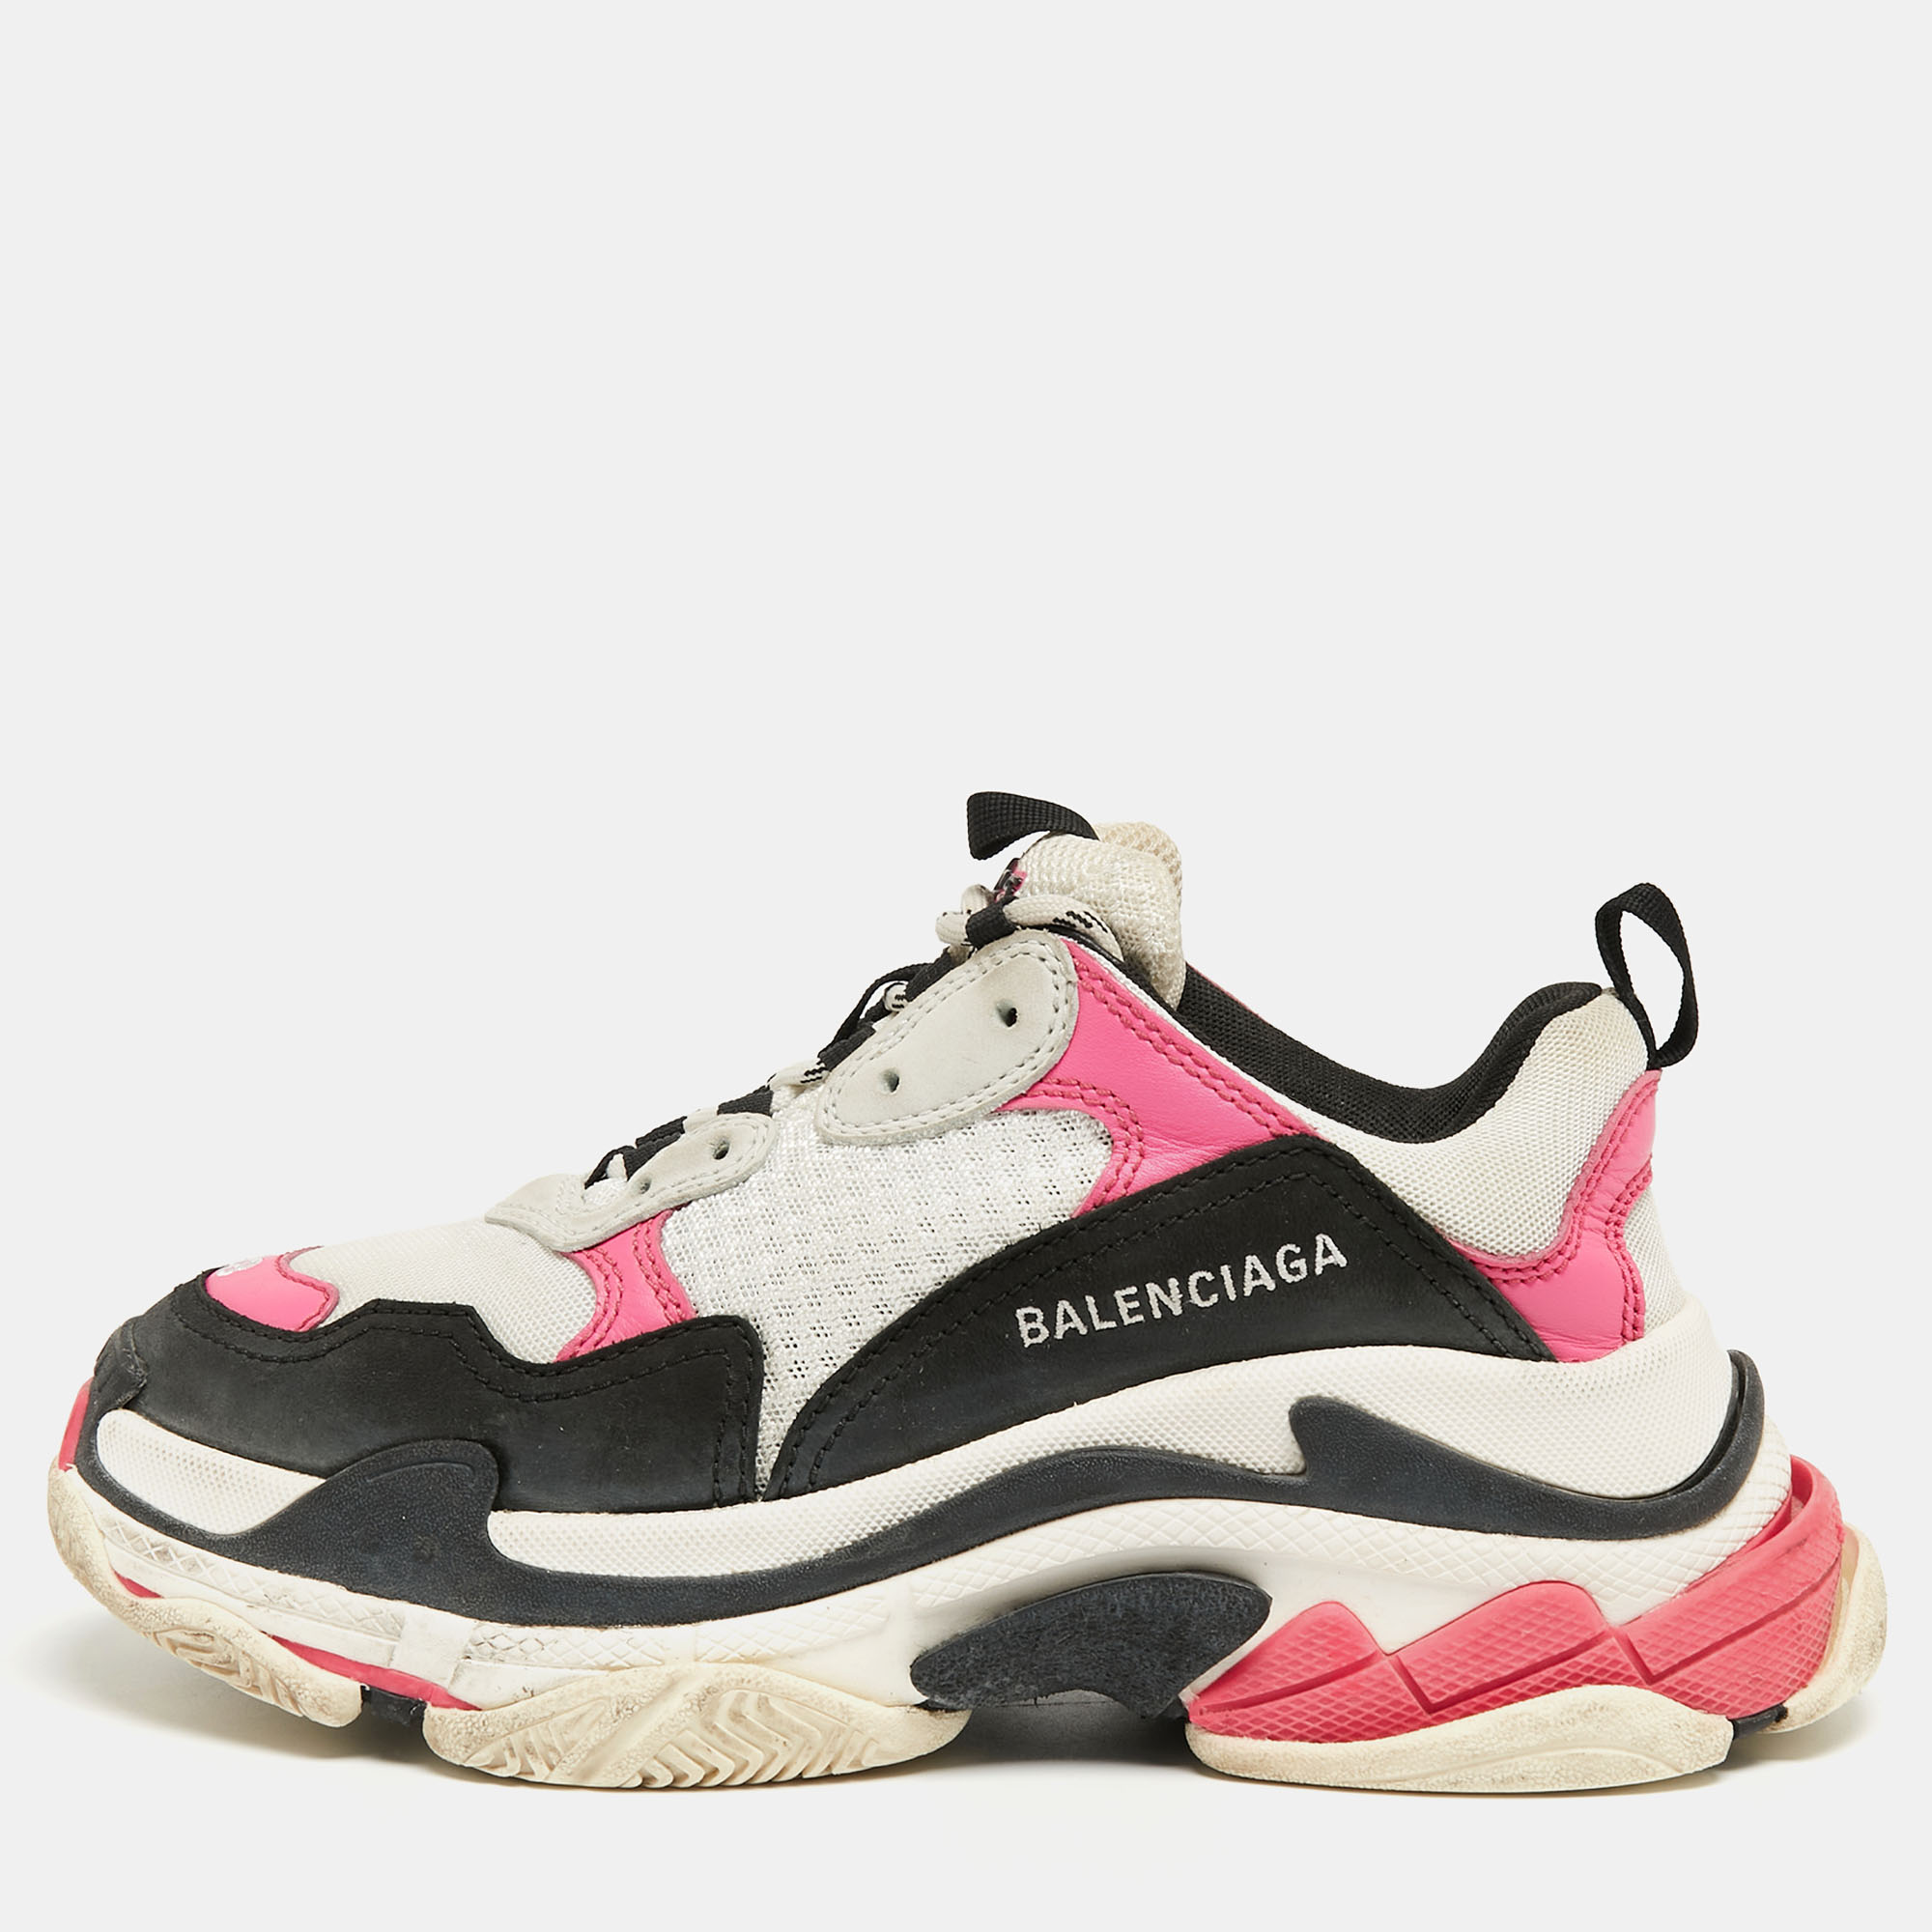 Balenciaga Multicolor Mesh And Leather Triple S Sneakers Size 38